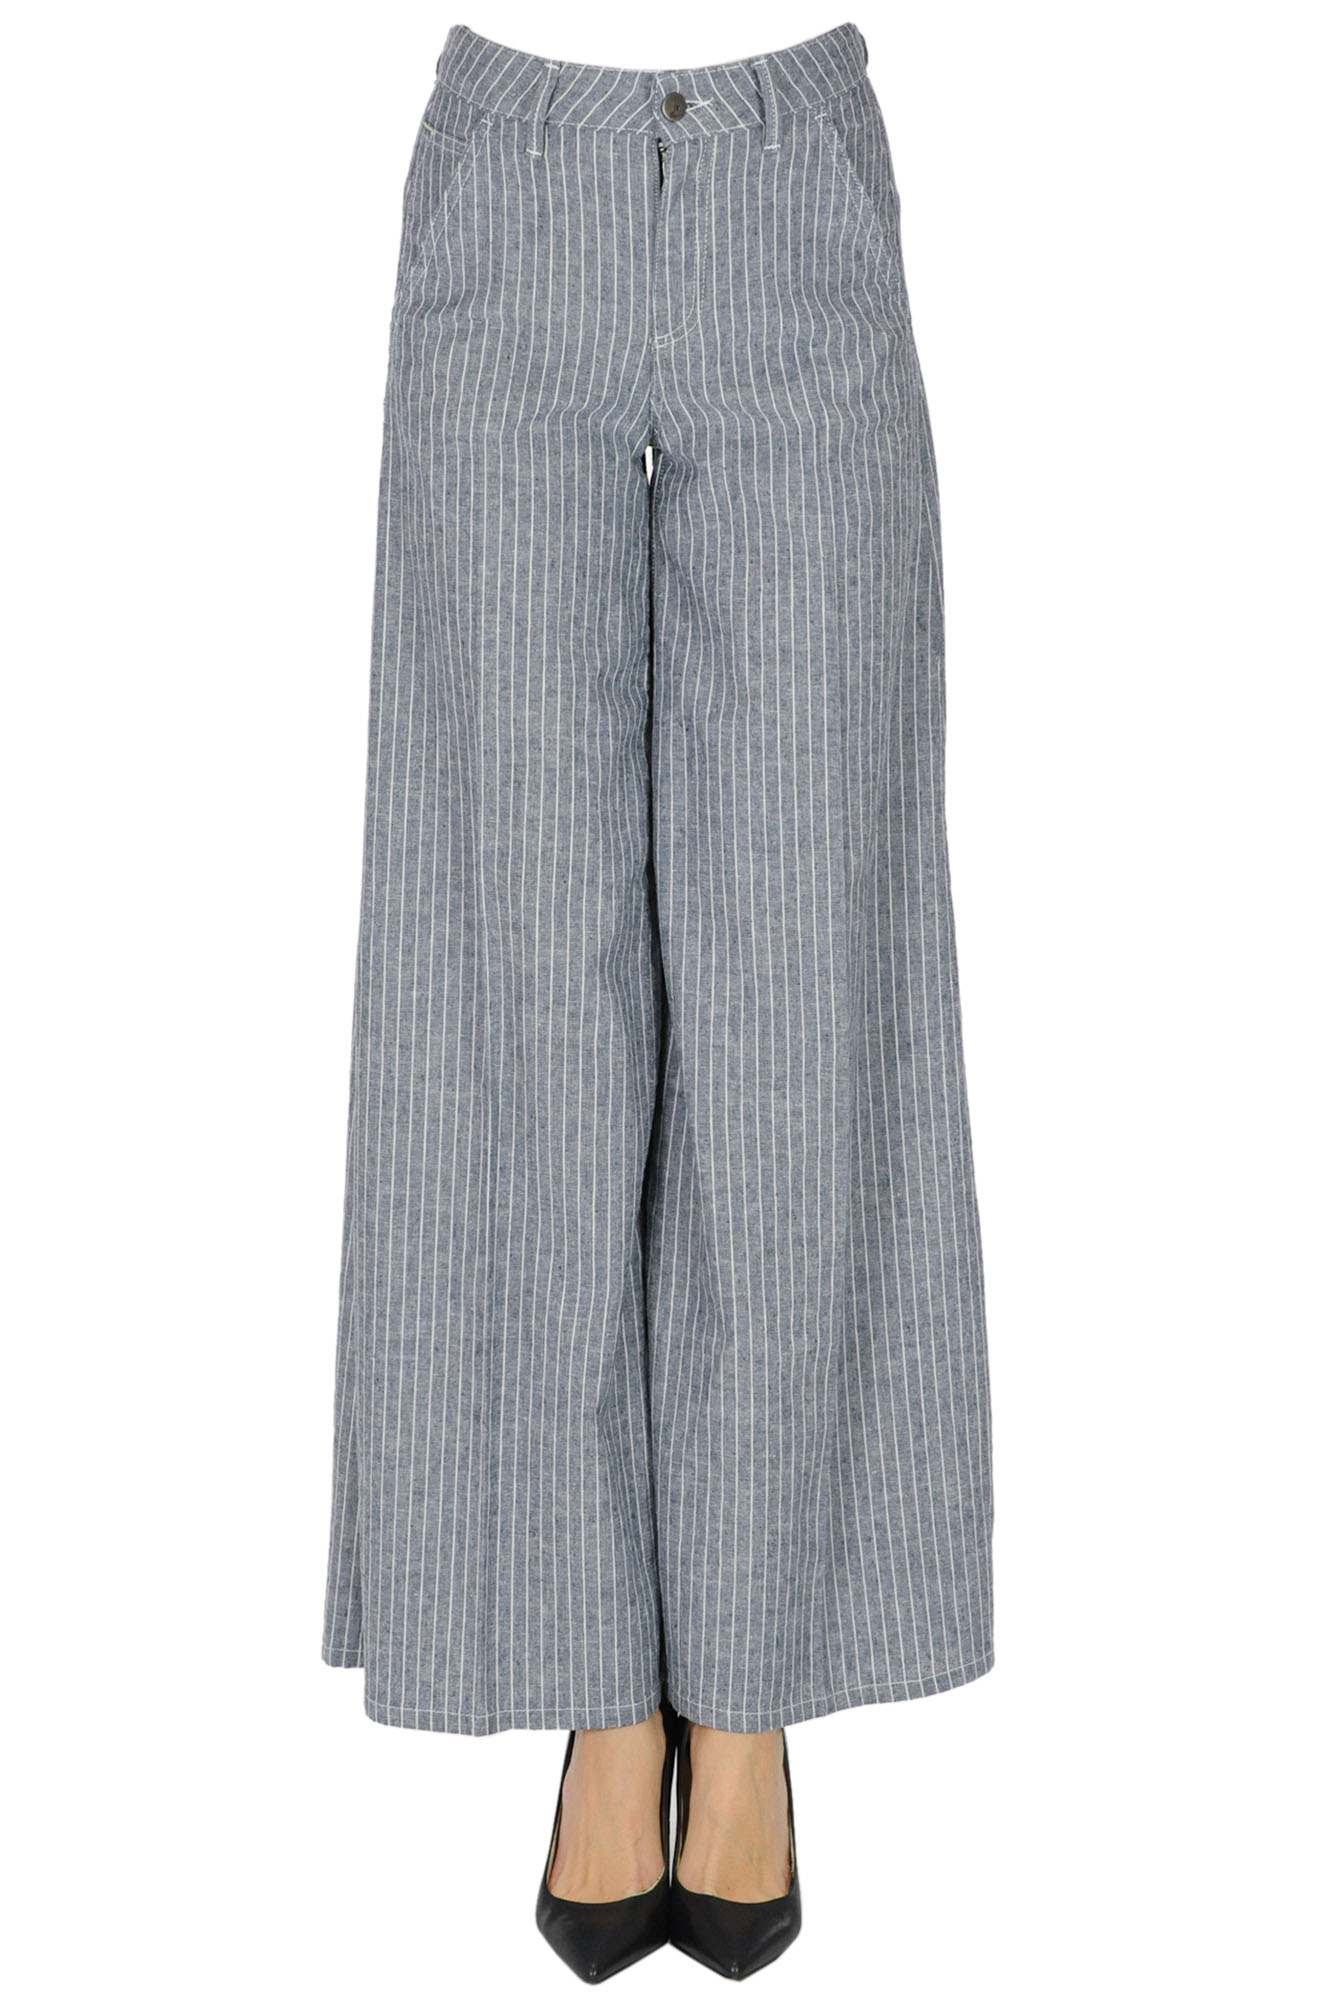 ATELIER CIGALA'S STRIPED COTTON AND LINEN TROUSERS